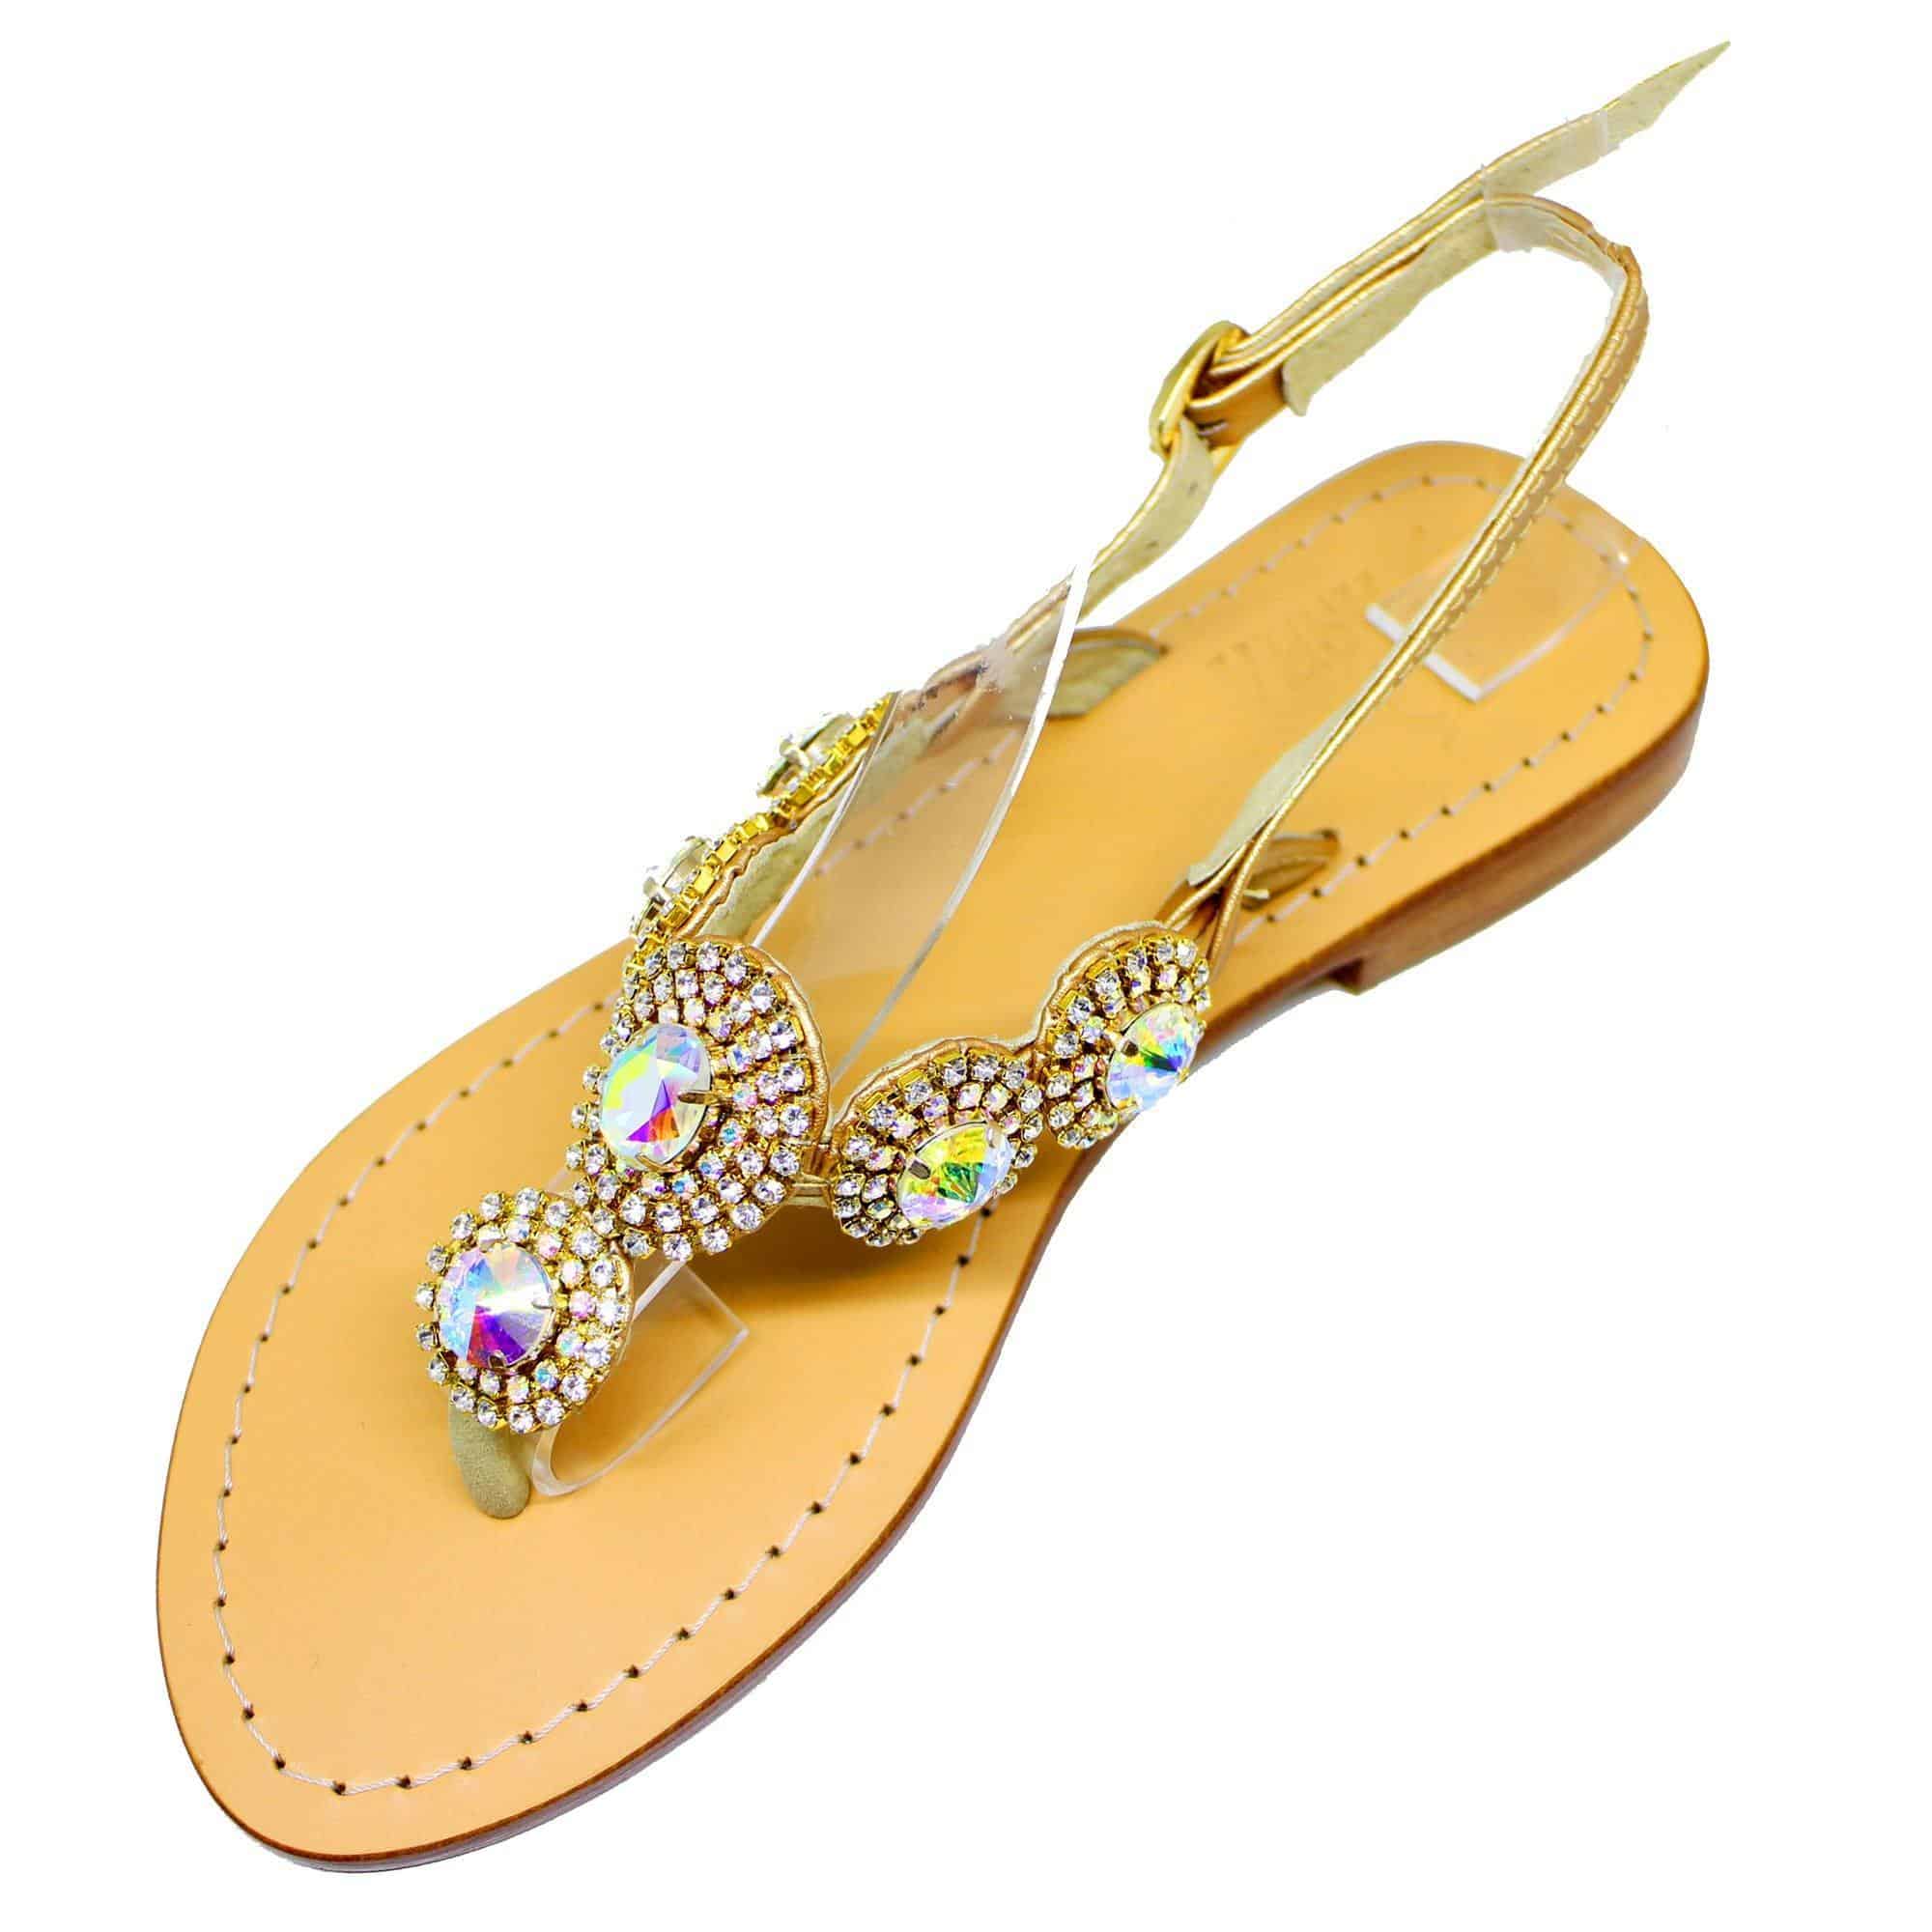 MAURITIUS - Pasha Sandals - Jewelry for your feet - 